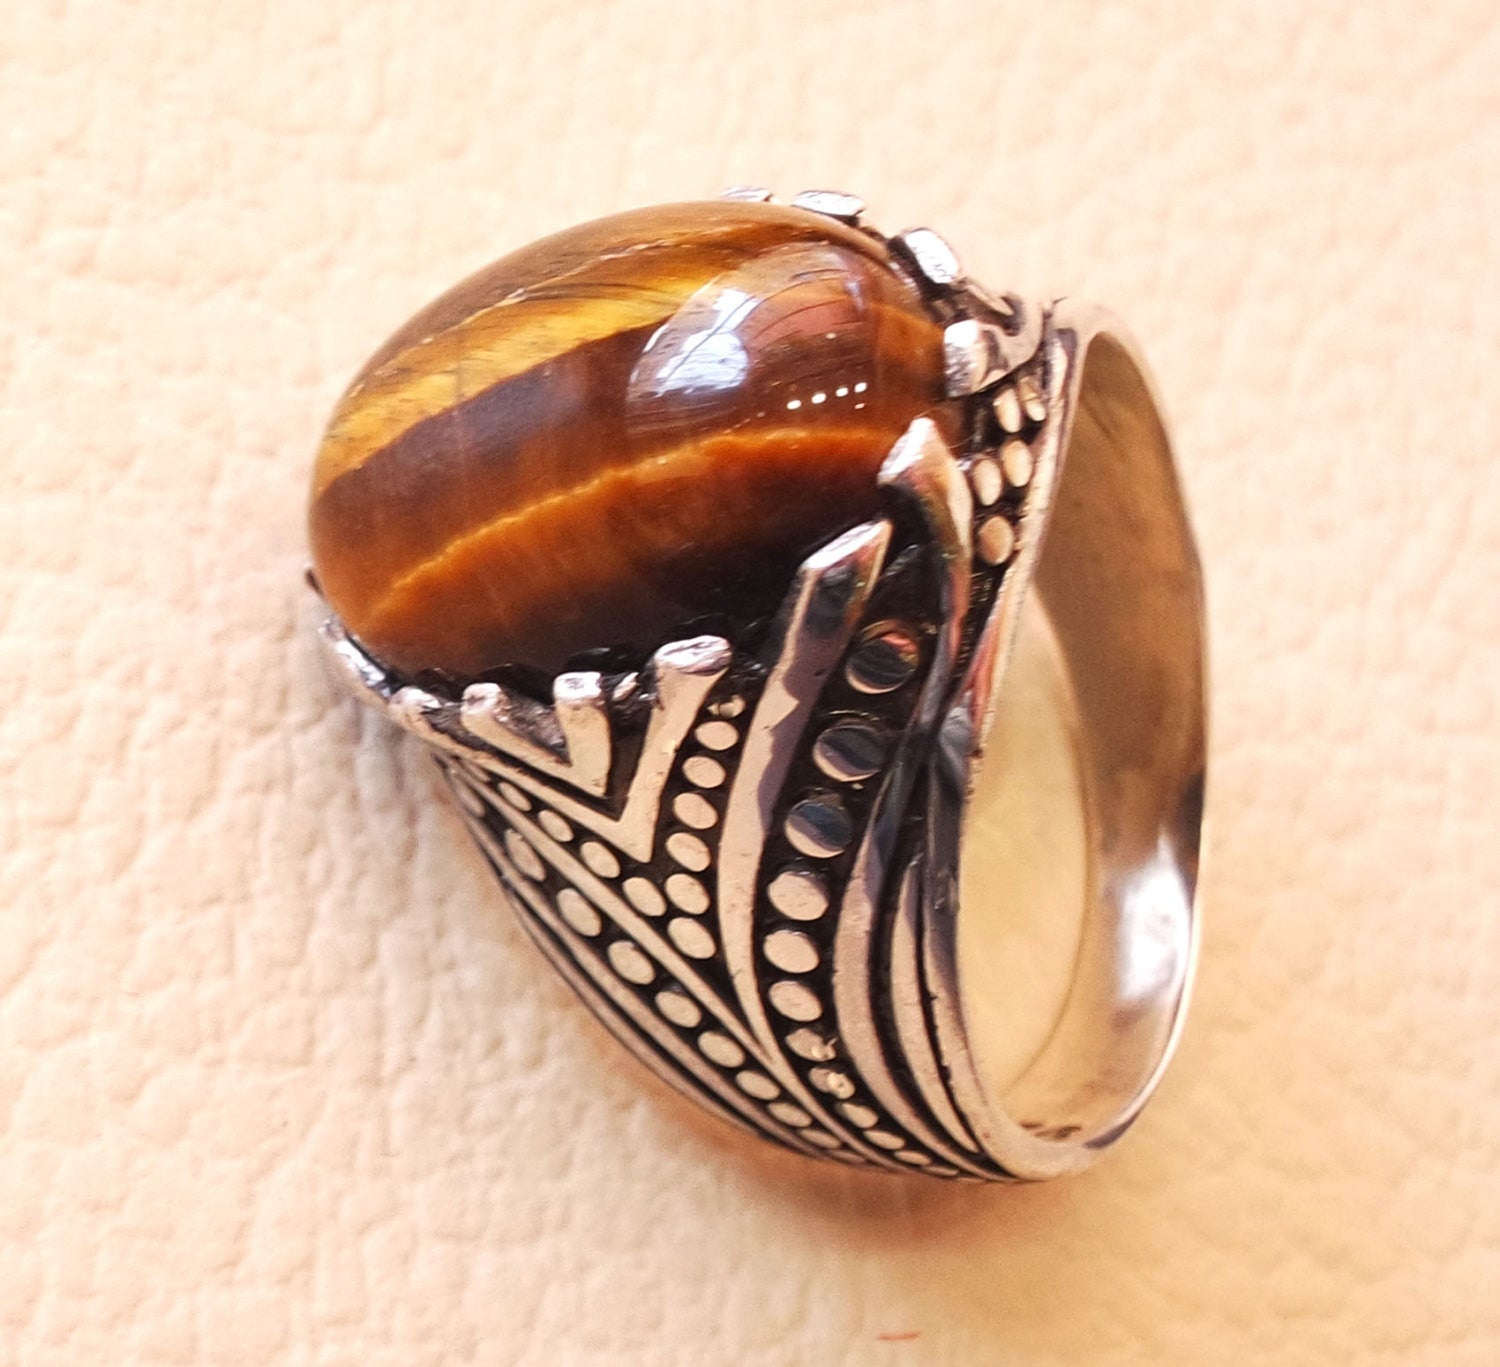 cat eye tiger eye semi precious natural cabochon stone men ring sterling silver 925 any size ottoman turkish middle eastern arabic jewelry